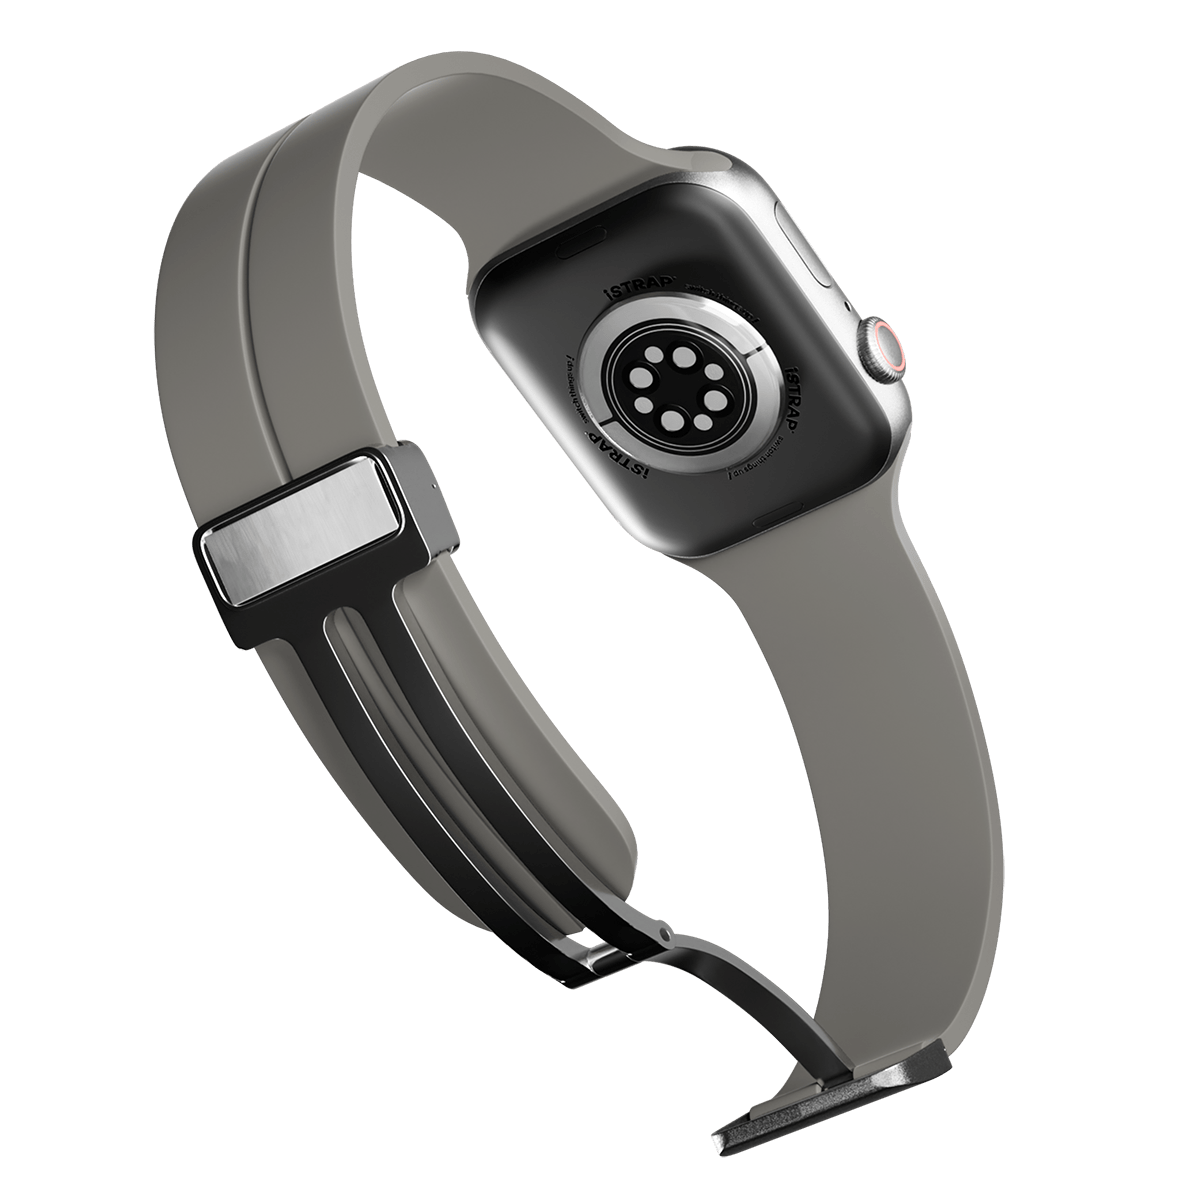 Fog D-Buckle Sport Band for Apple Watch